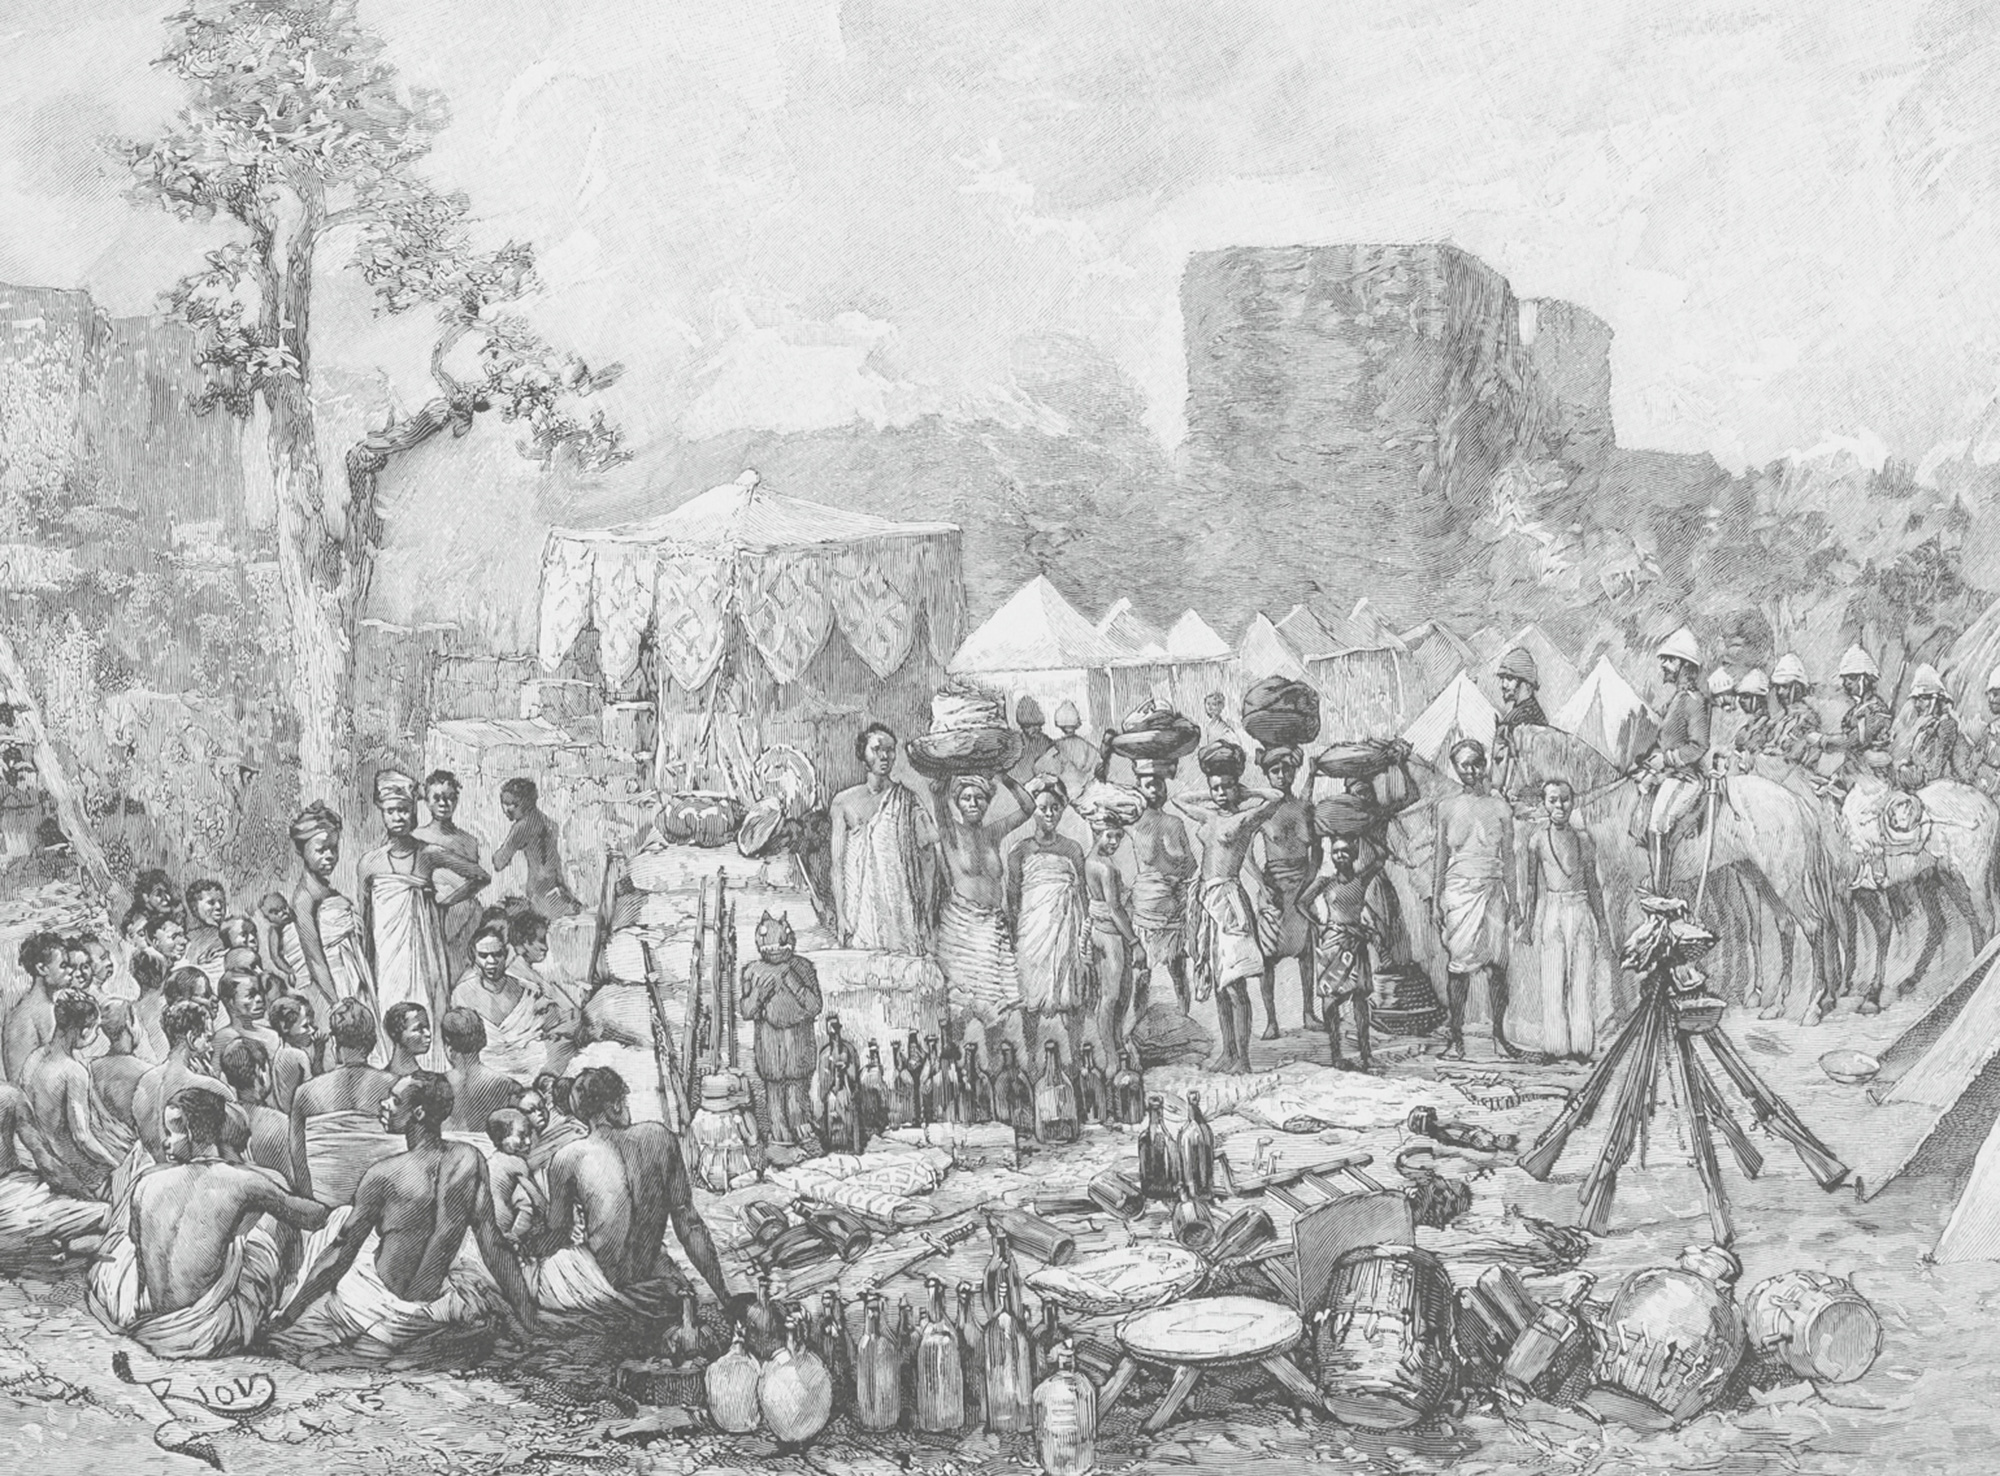 An Illustration in Alexandre L. d’Albéca eighteen ninety-five work titled “La France au Dahomey” depicting General Dodd’s camp at Place Goho in Abomey.